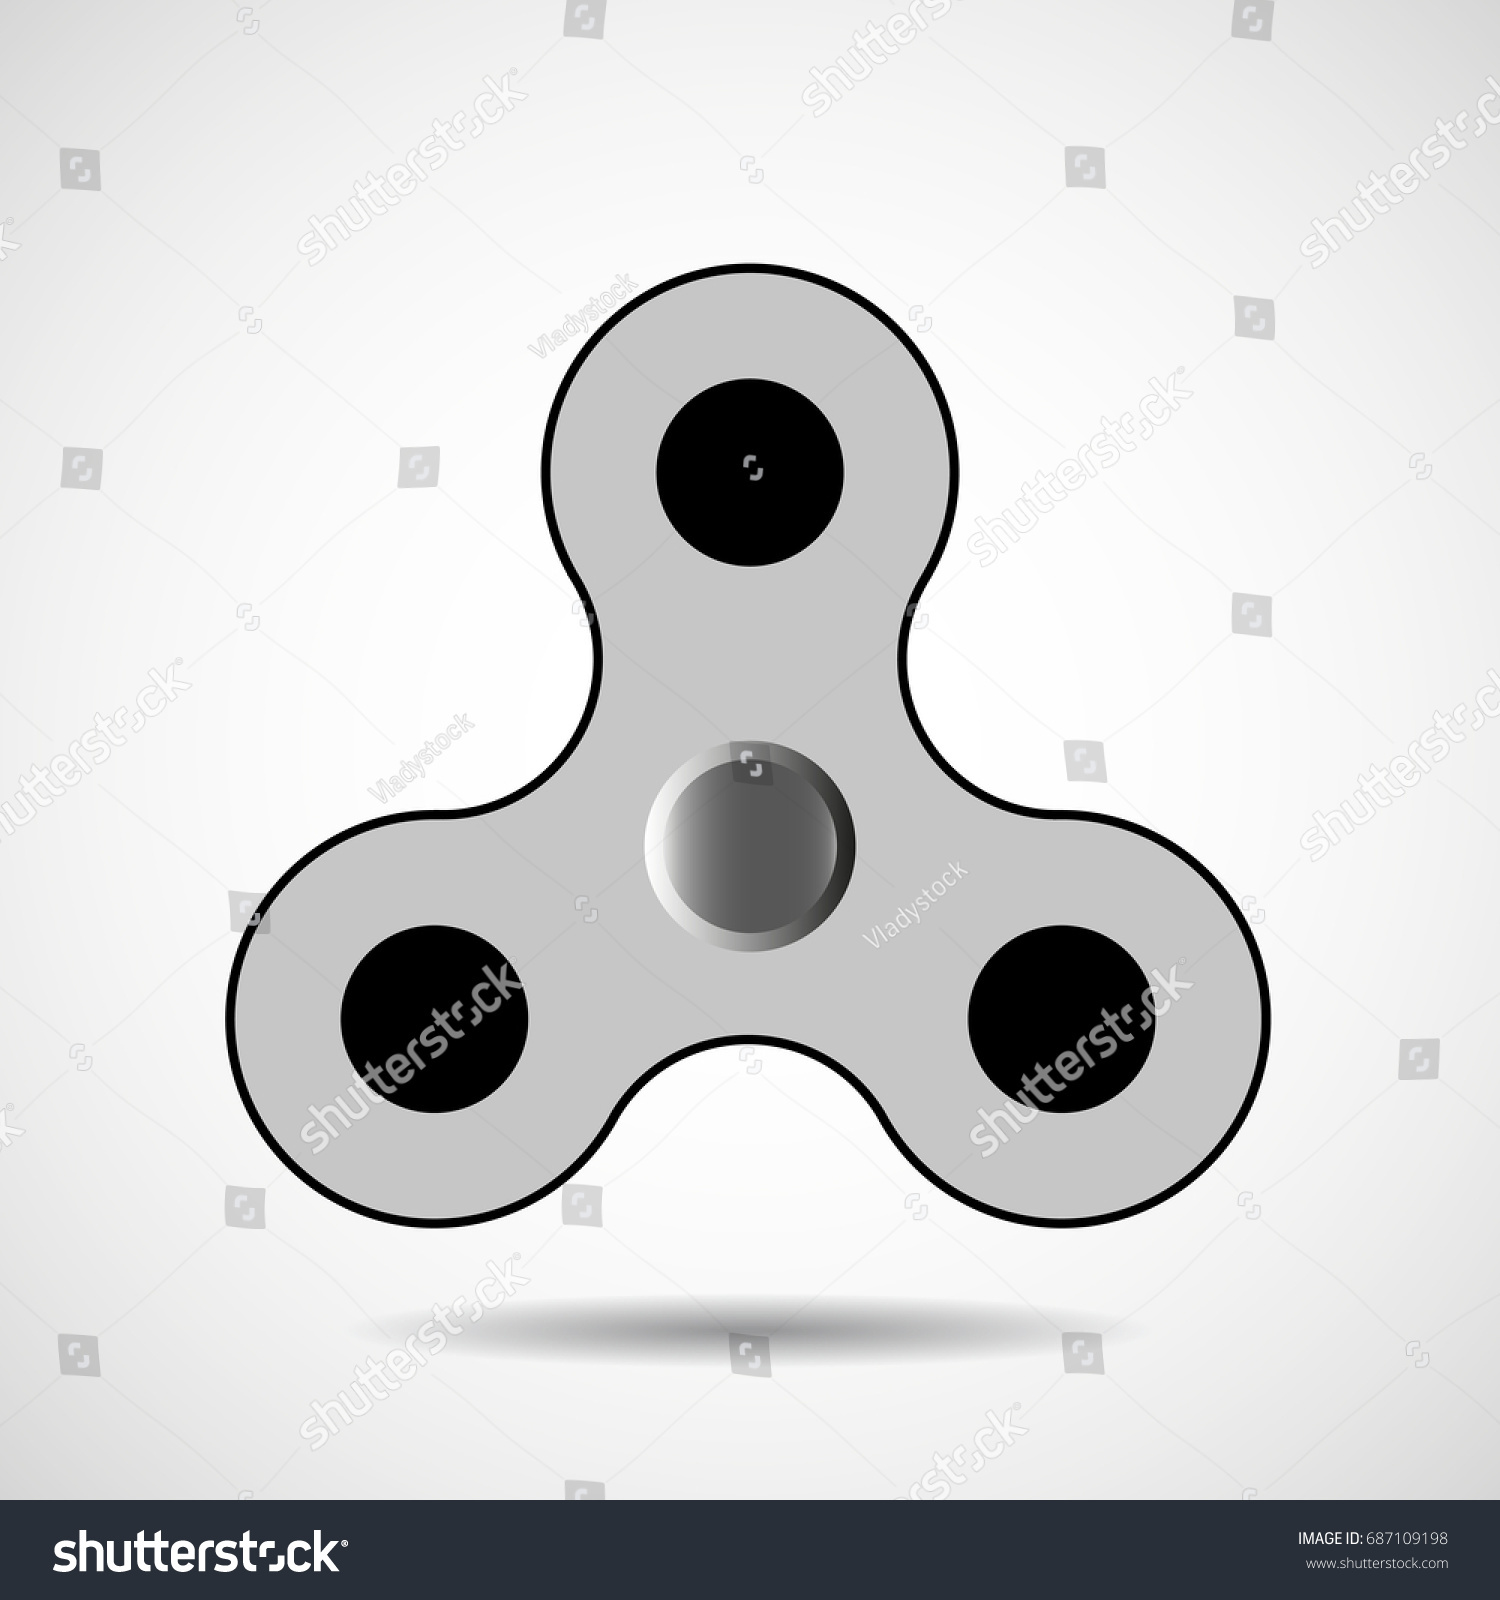 Fidget Spinners Isolated On White Background Stock Vector Royalty Free Shutterstock